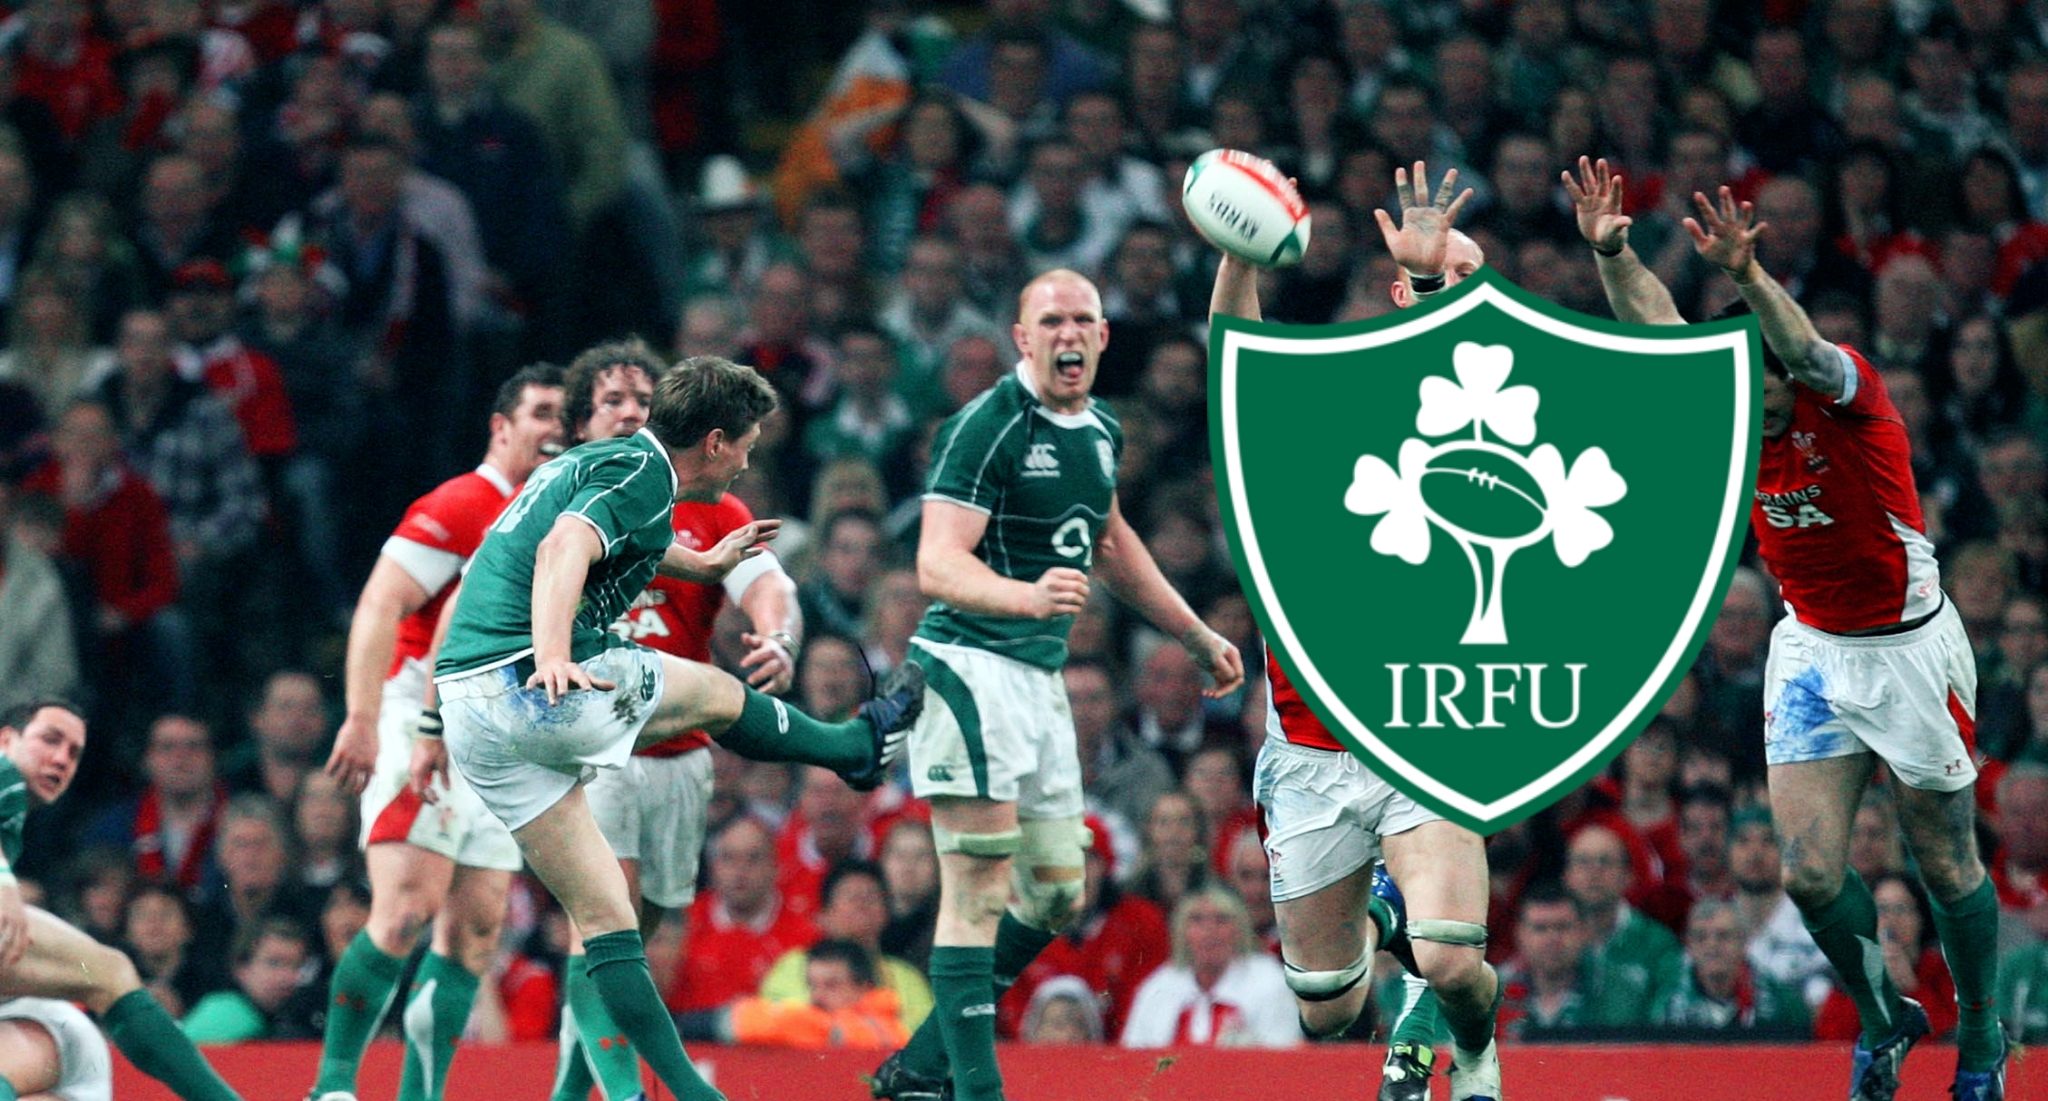 Quiz Time: Name the Ireland team that won the 2009 Grand Slam!